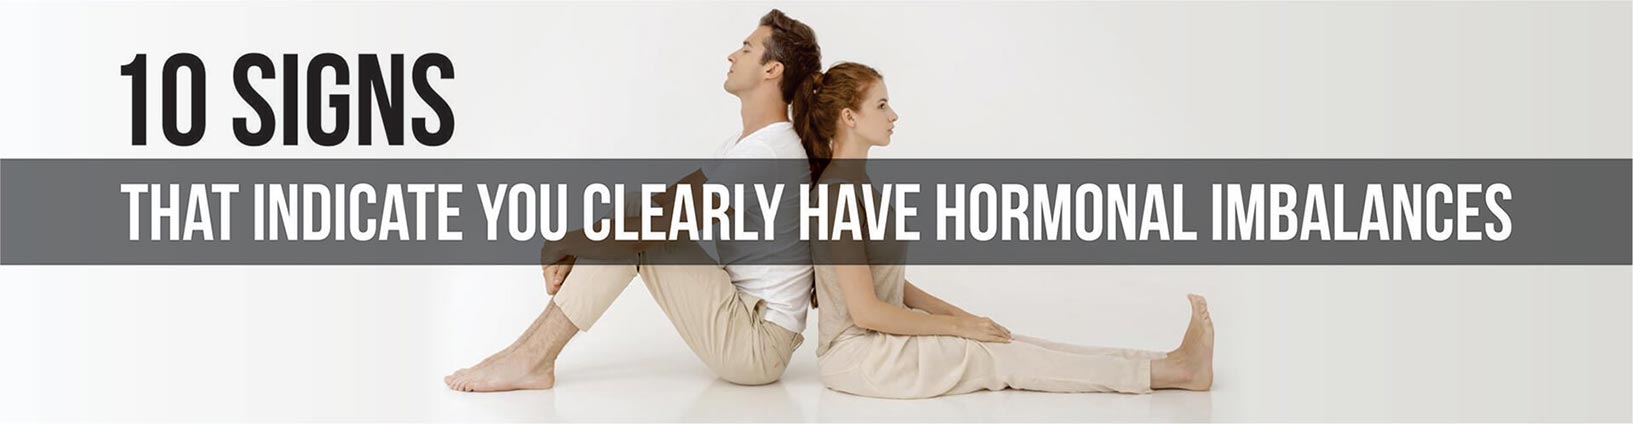 10 Signs That Indicate You Clearly Have Hormonal Imbalances